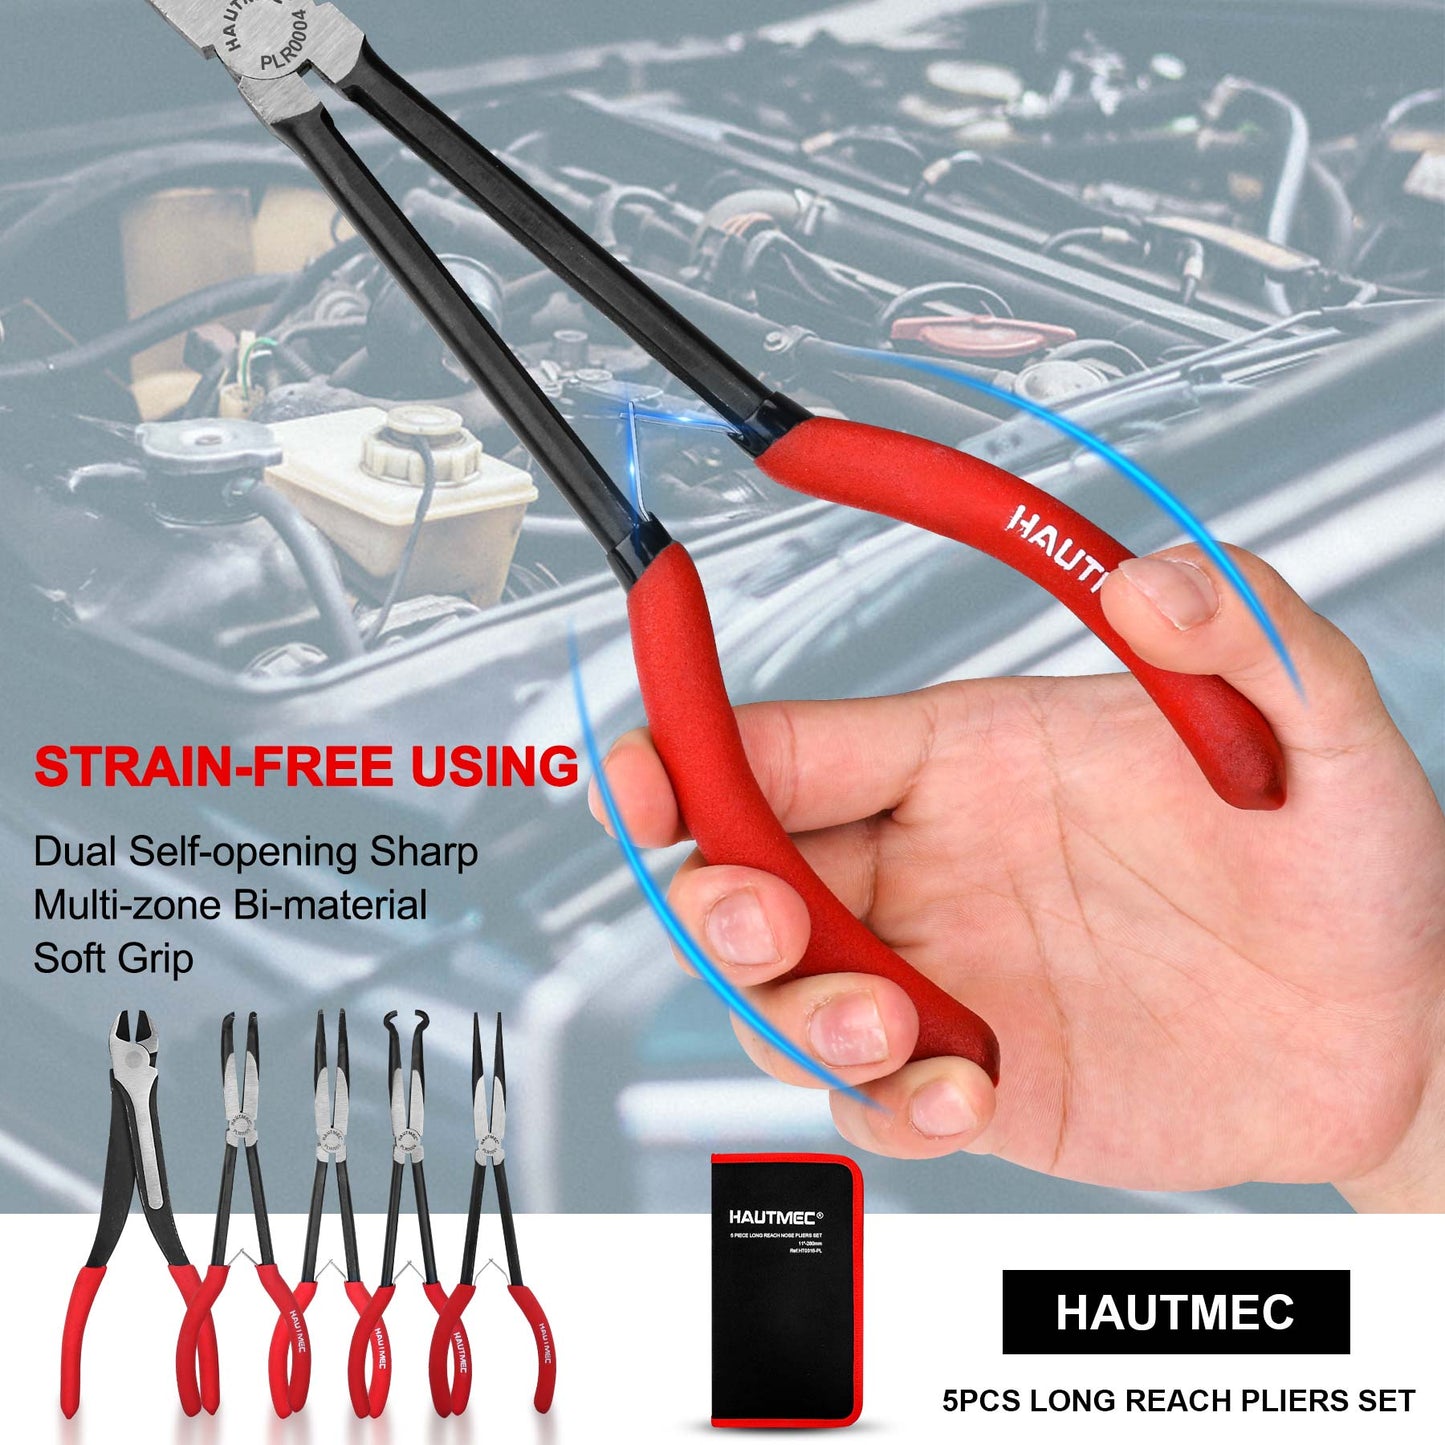 HAUTMEC 5Pcs 11Inch Heavy Duty Long Reach Pliers Set, Spring Loaded, Including Diagonal Cutting Pliers, Hose Gripping Pliers, Straight and 45/90 Degree Bent Long Nose Pliers HT0316